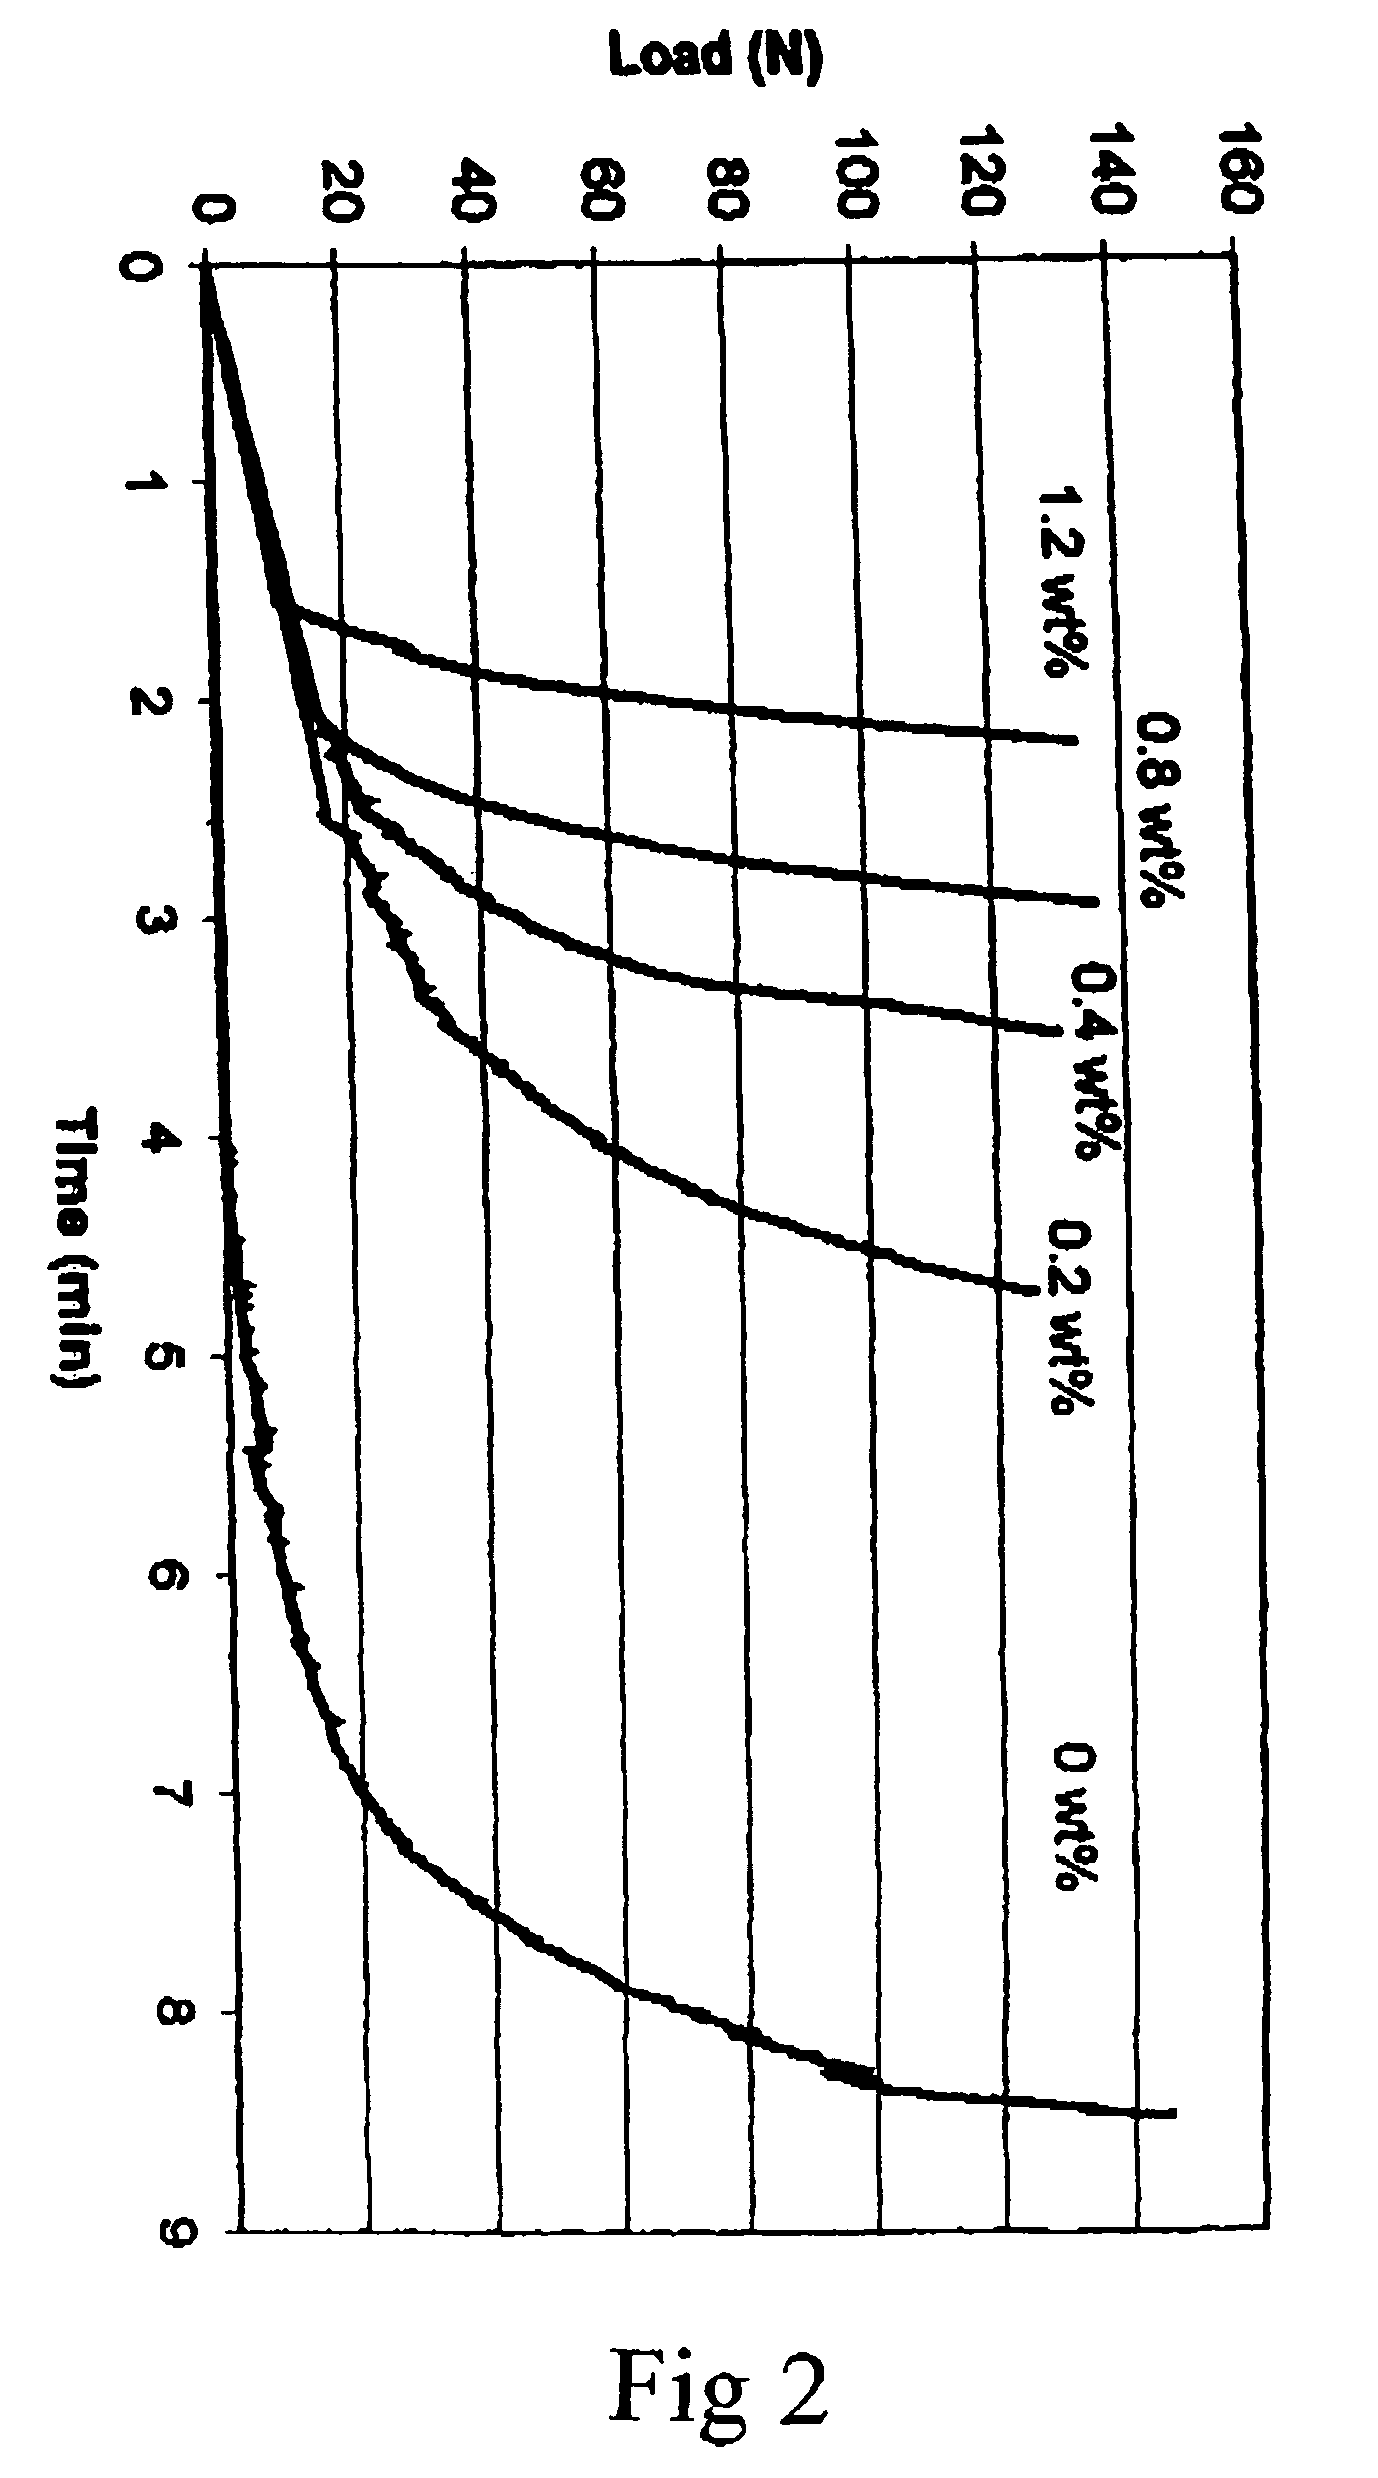 Composition for an injectable bone mineral substitute material